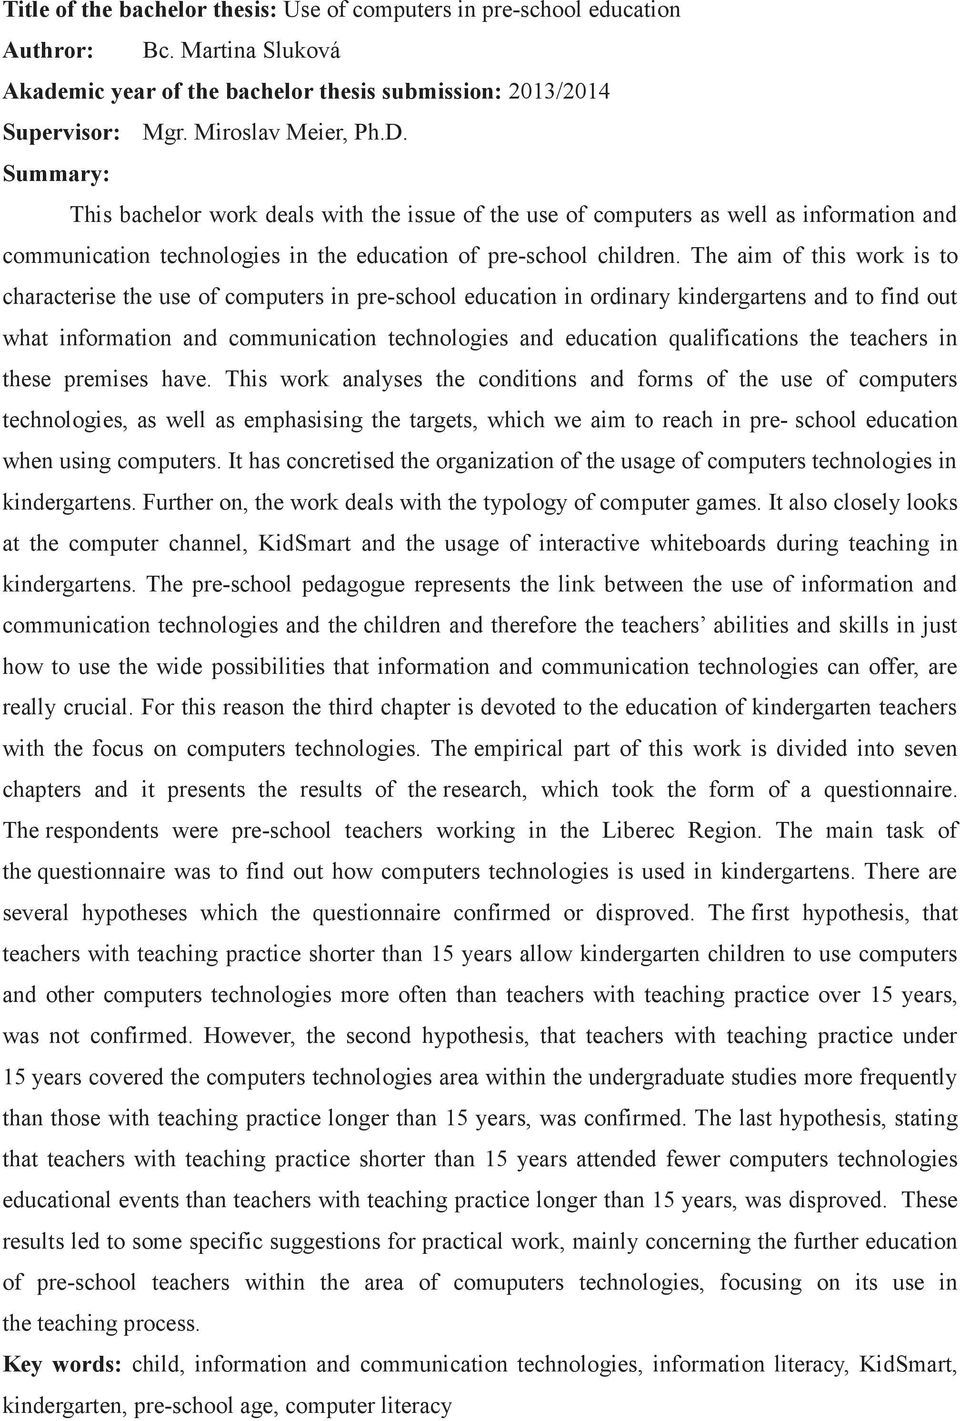 The aim of this work is to characterise the use of computers in pre-school education in ordinary kindergartens and to find out what information and communication technologies and education